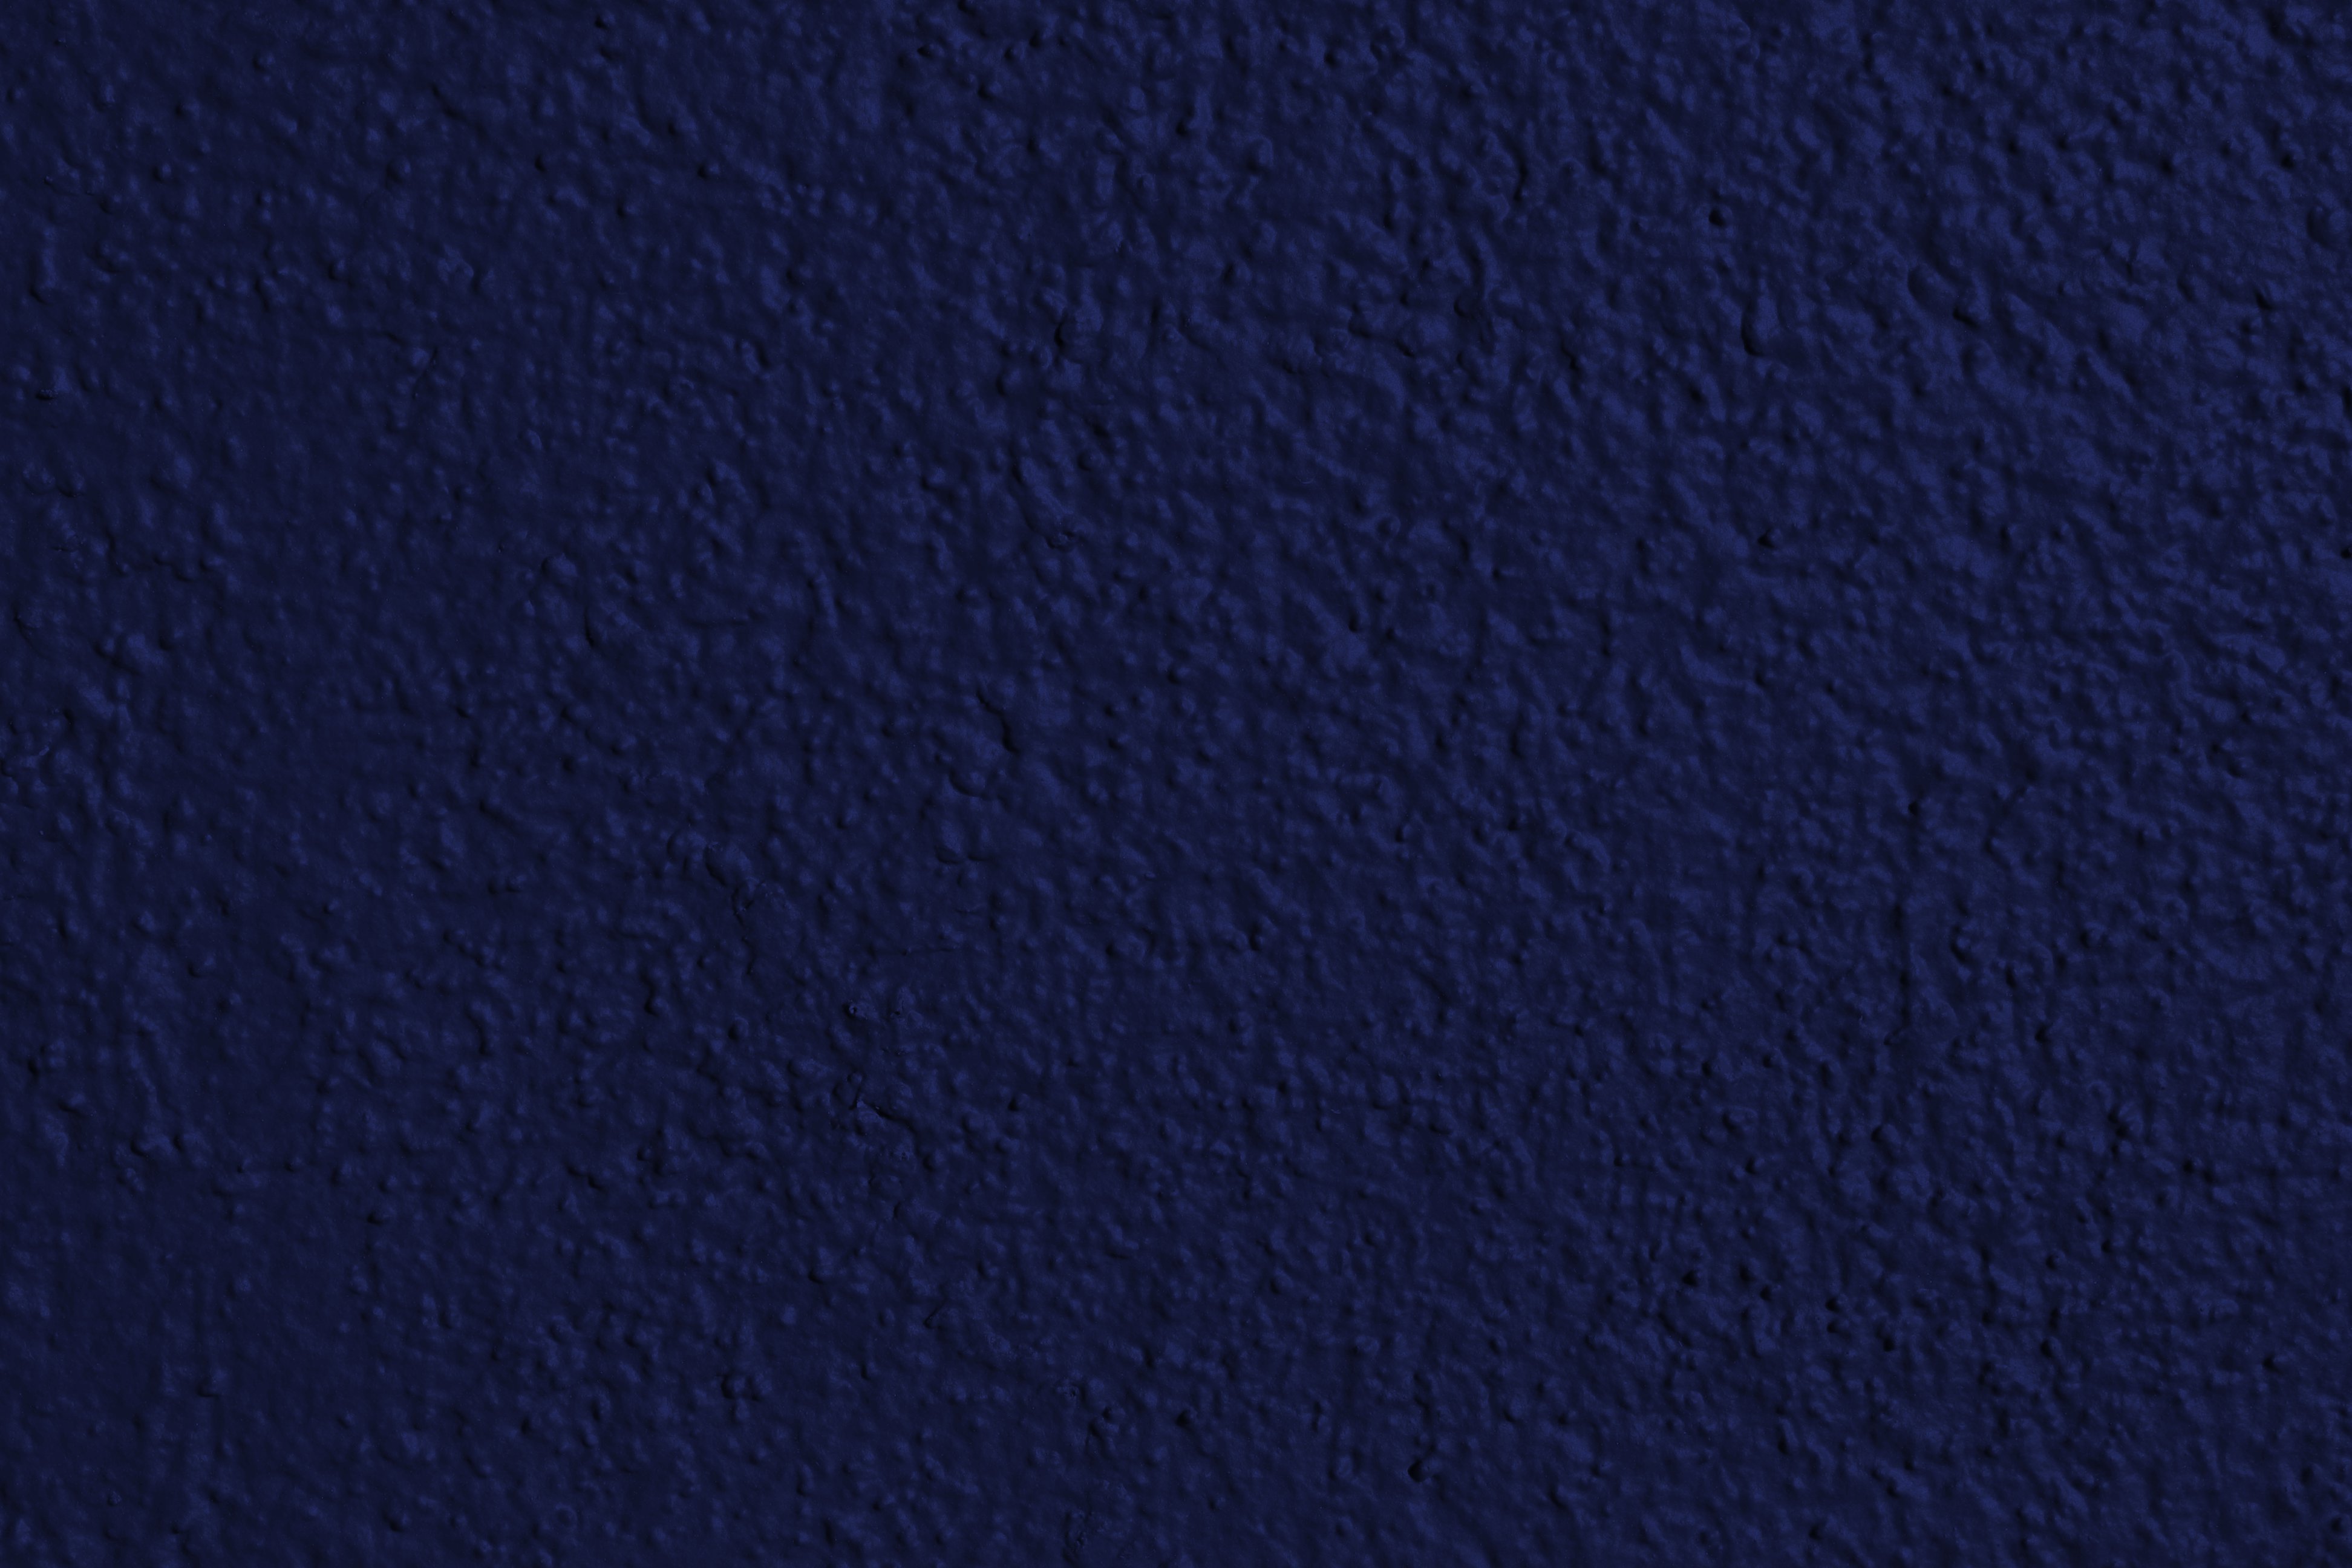 Navy Blue Painted Wall Texture Picture. Free Photograph. Photo Public Domain